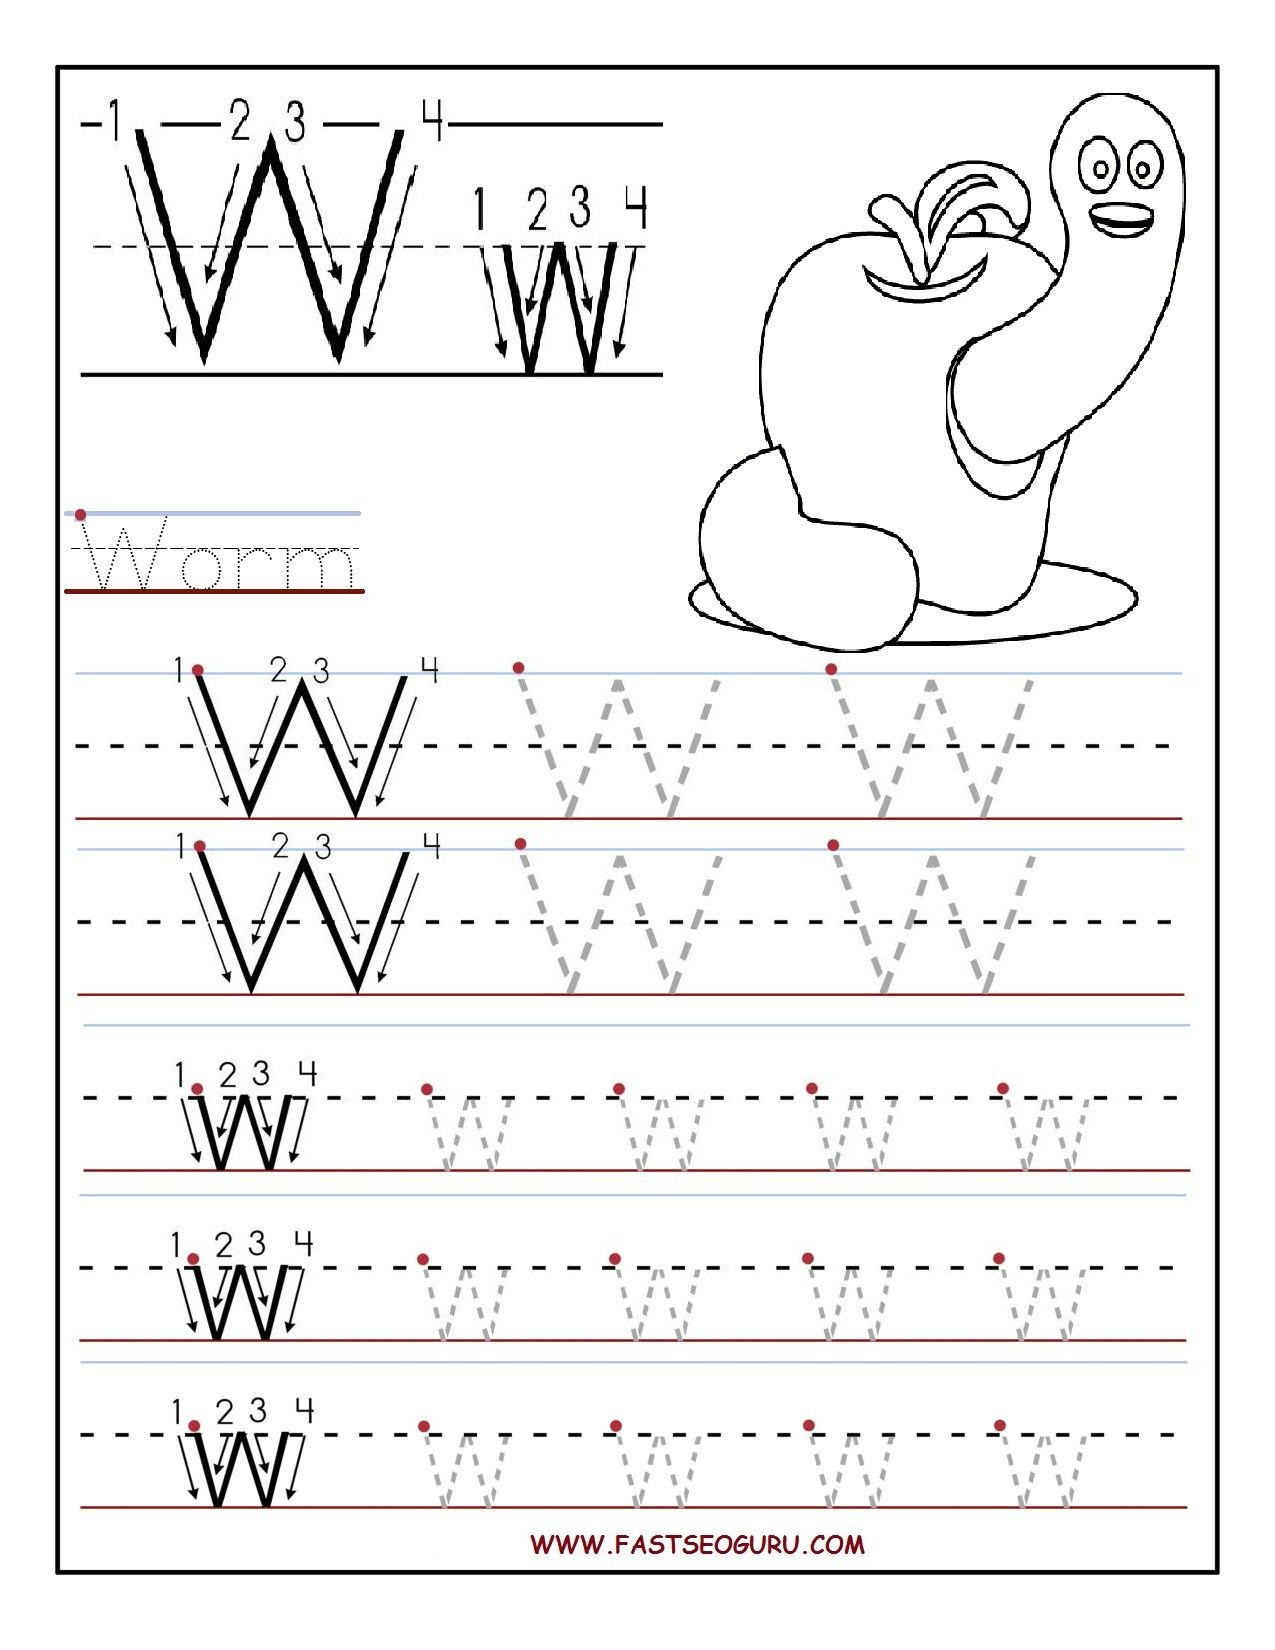 Printable Letter W Tracing Worksheets For Preschool with regard to Letter W Tracing Worksheets Preschool